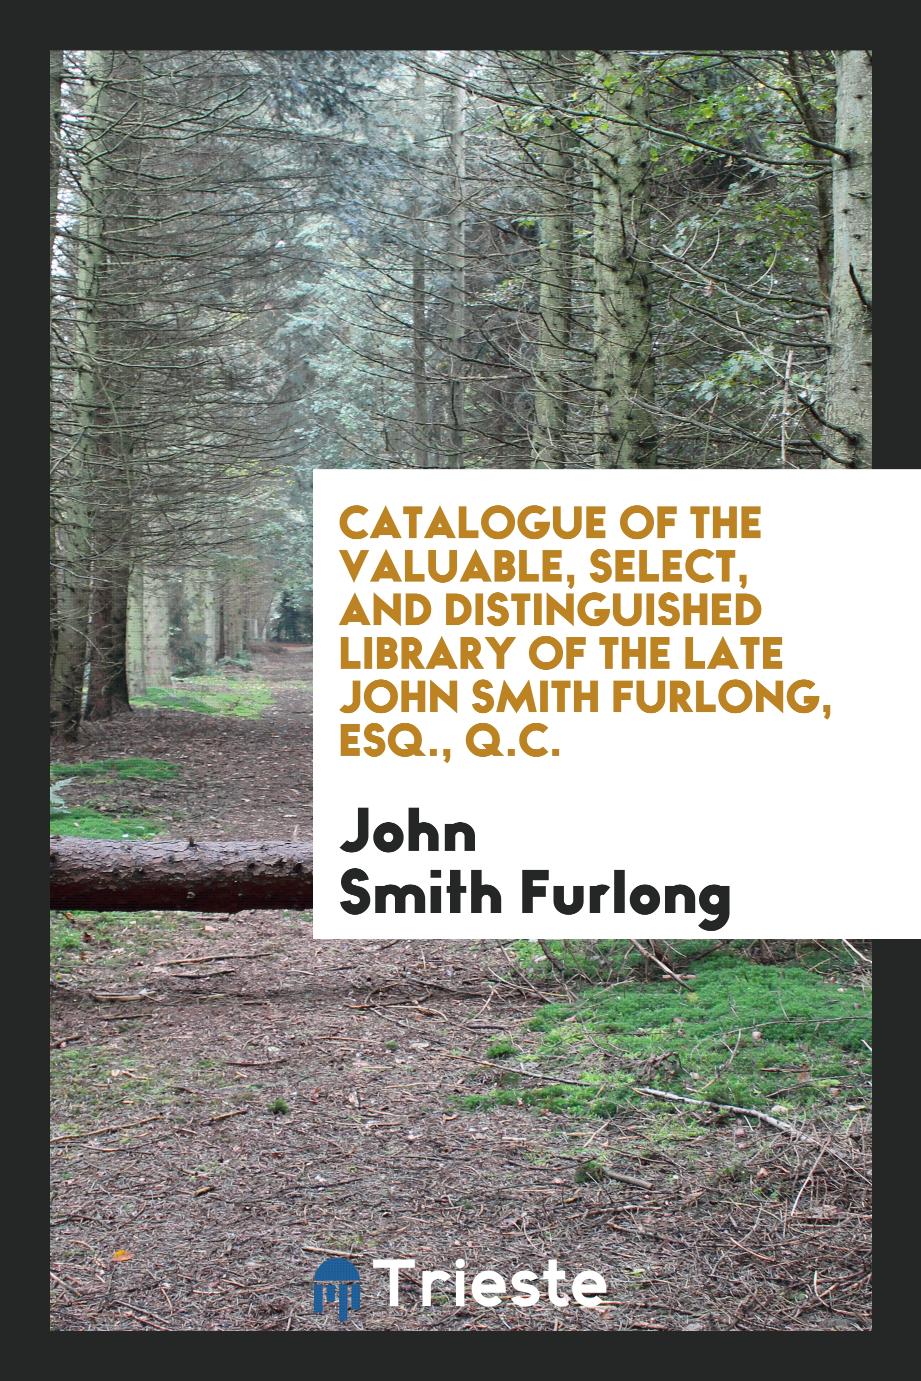 Catalogue of the Valuable, Select, and Distinguished Library of the Late John Smith Furlong, Esq., q.c.